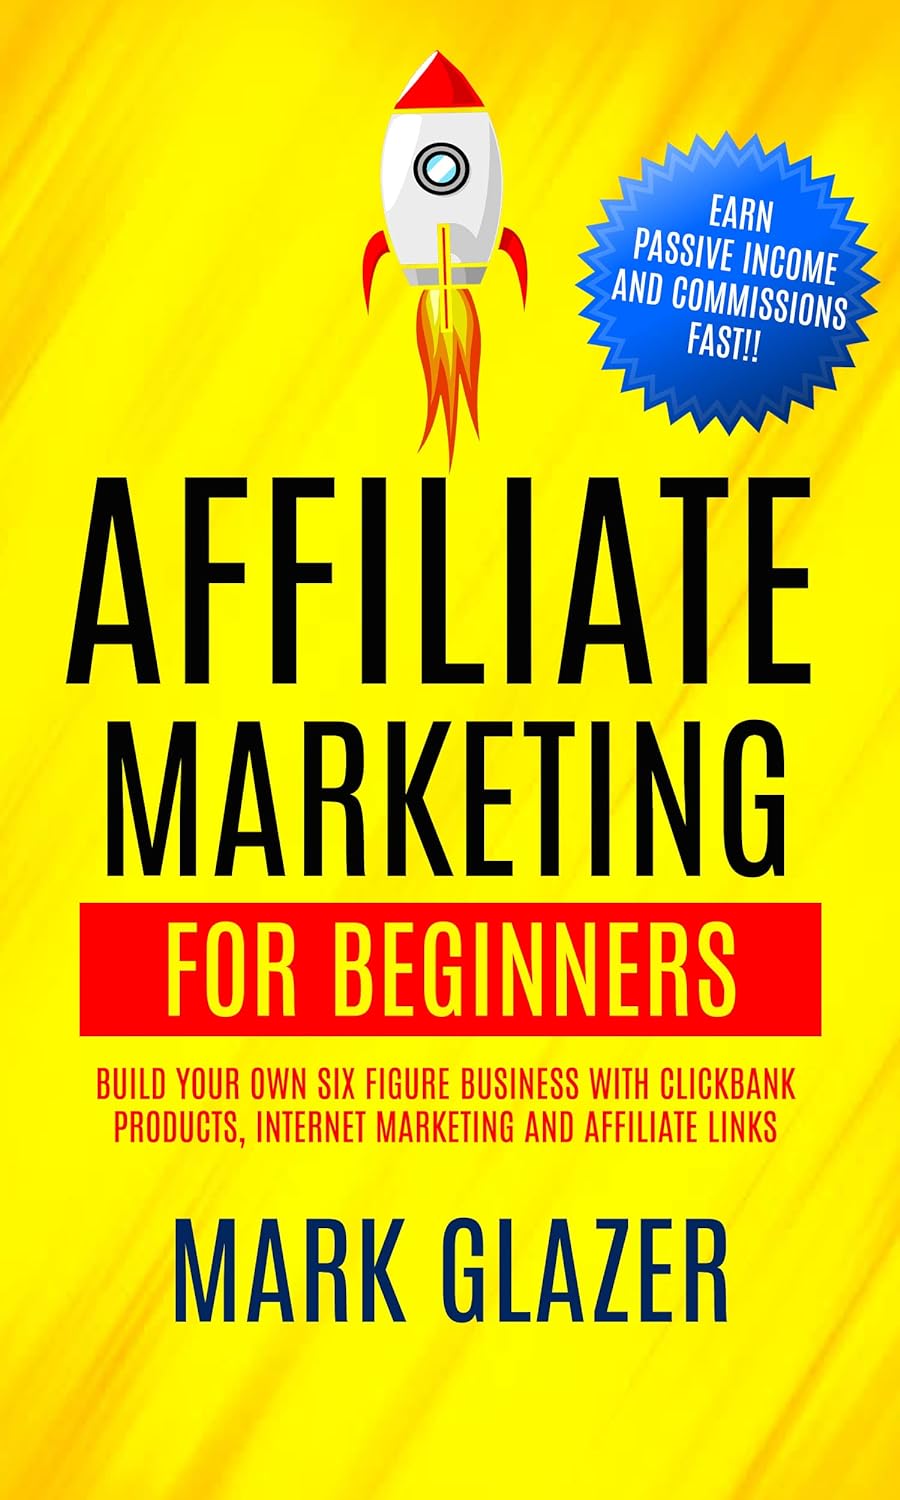 Affiliate Marketing for Beginners: Kindle Edition Review